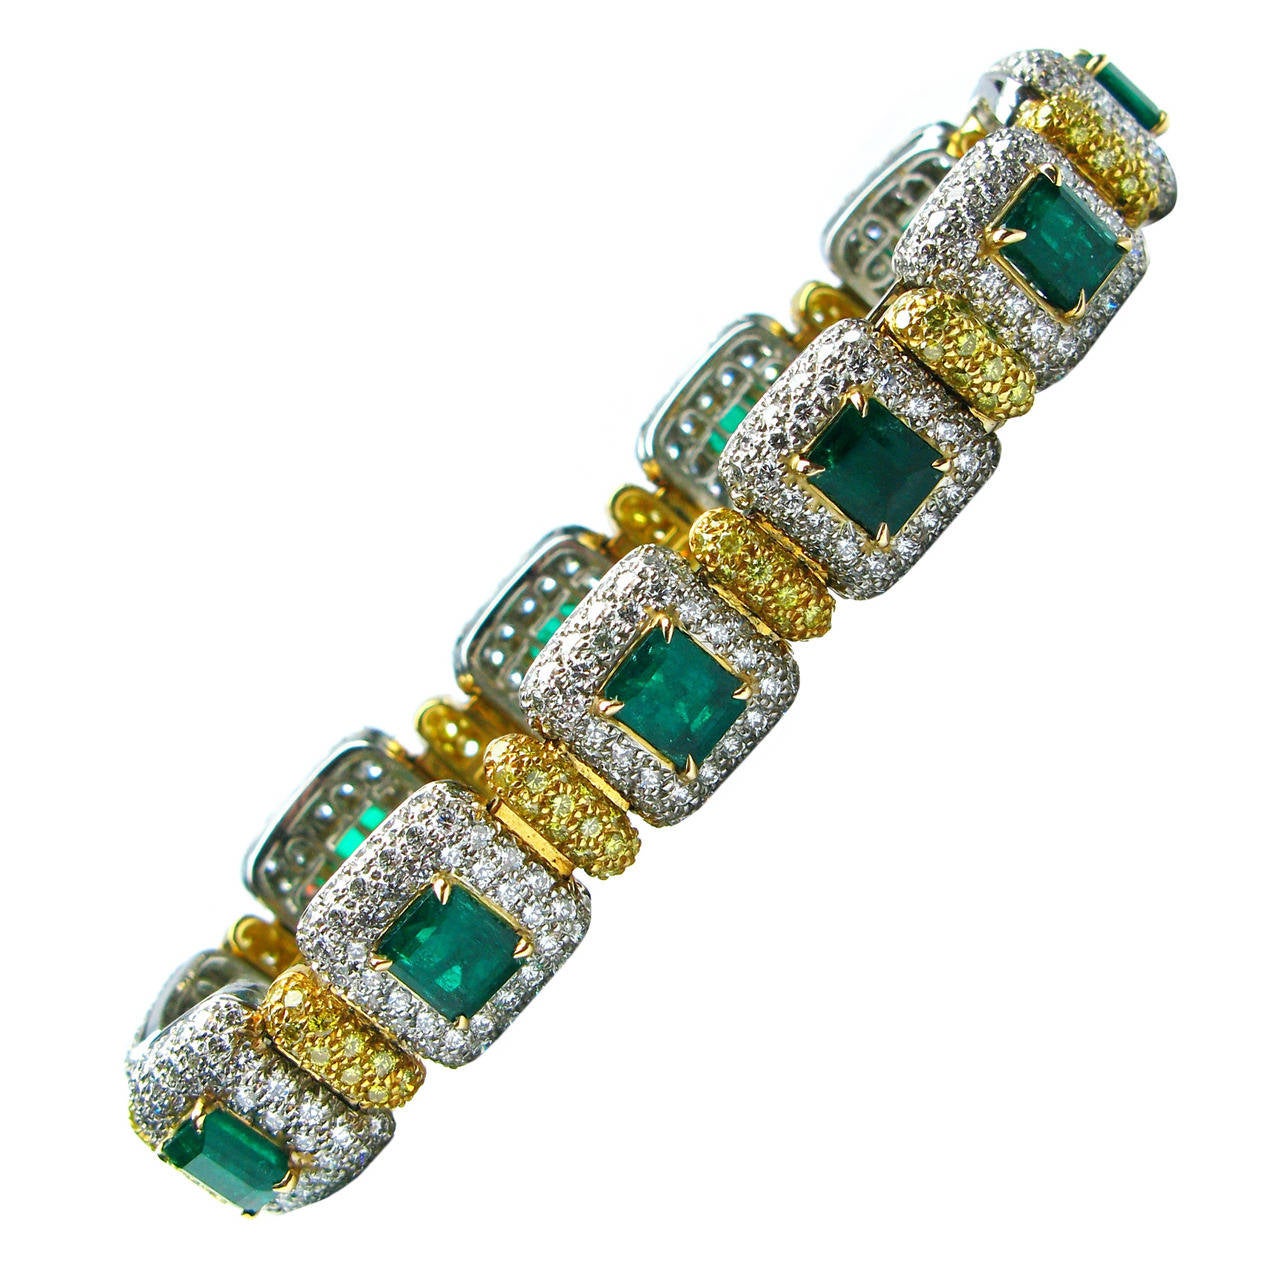 J. Birnbach 9.63 ct Emerald Bracelet with White and Fancy Yellow Pave Diamonds 